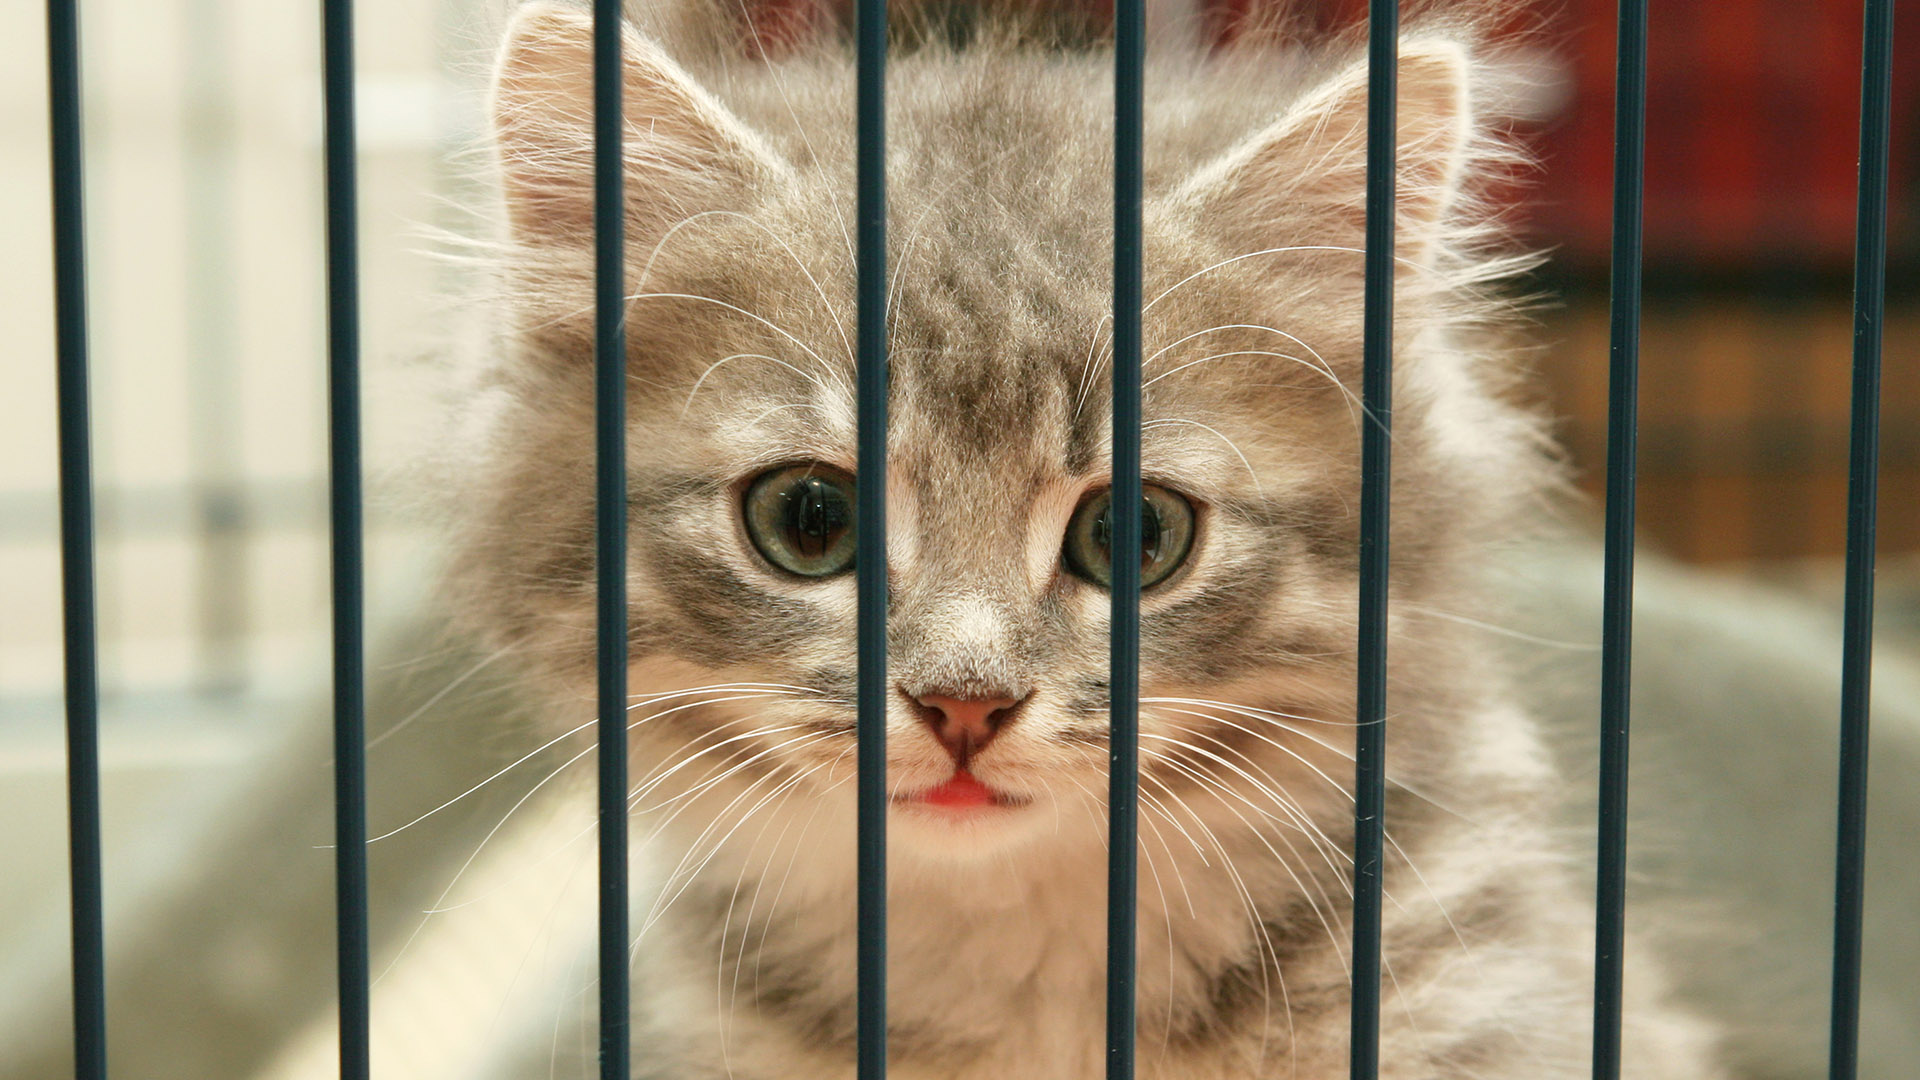 Florida Cat Breeder Accused of Animal Cruelty and Selling Sick Kittens -  Animal Legal Defense Fund